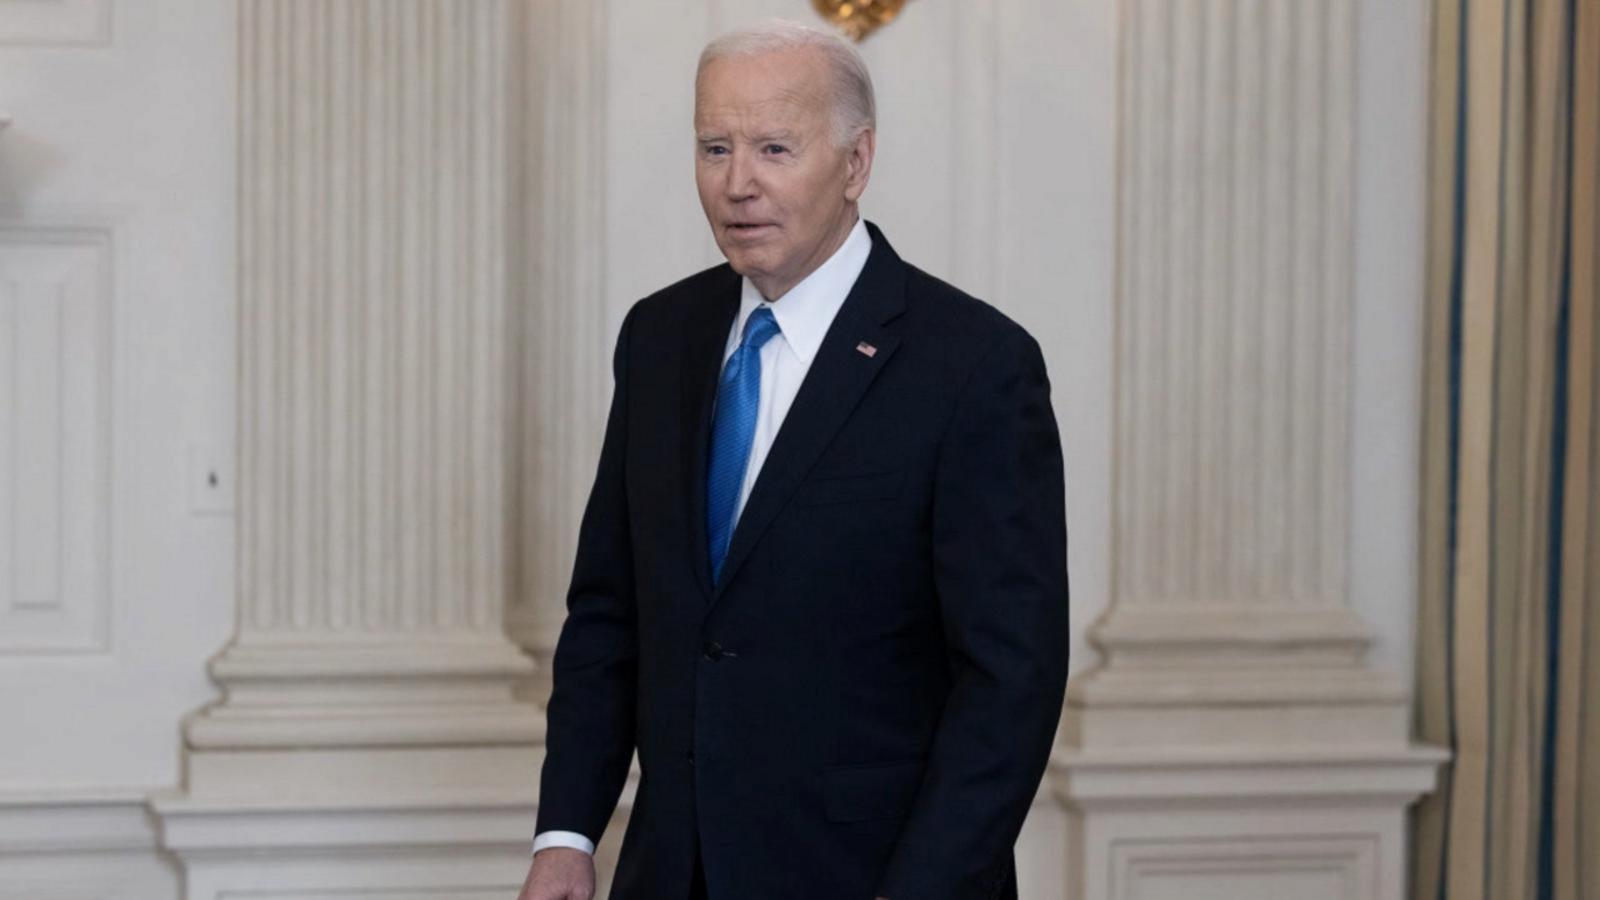 VIDEO: How can Biden and Trump win over voters in 2024 rematch?